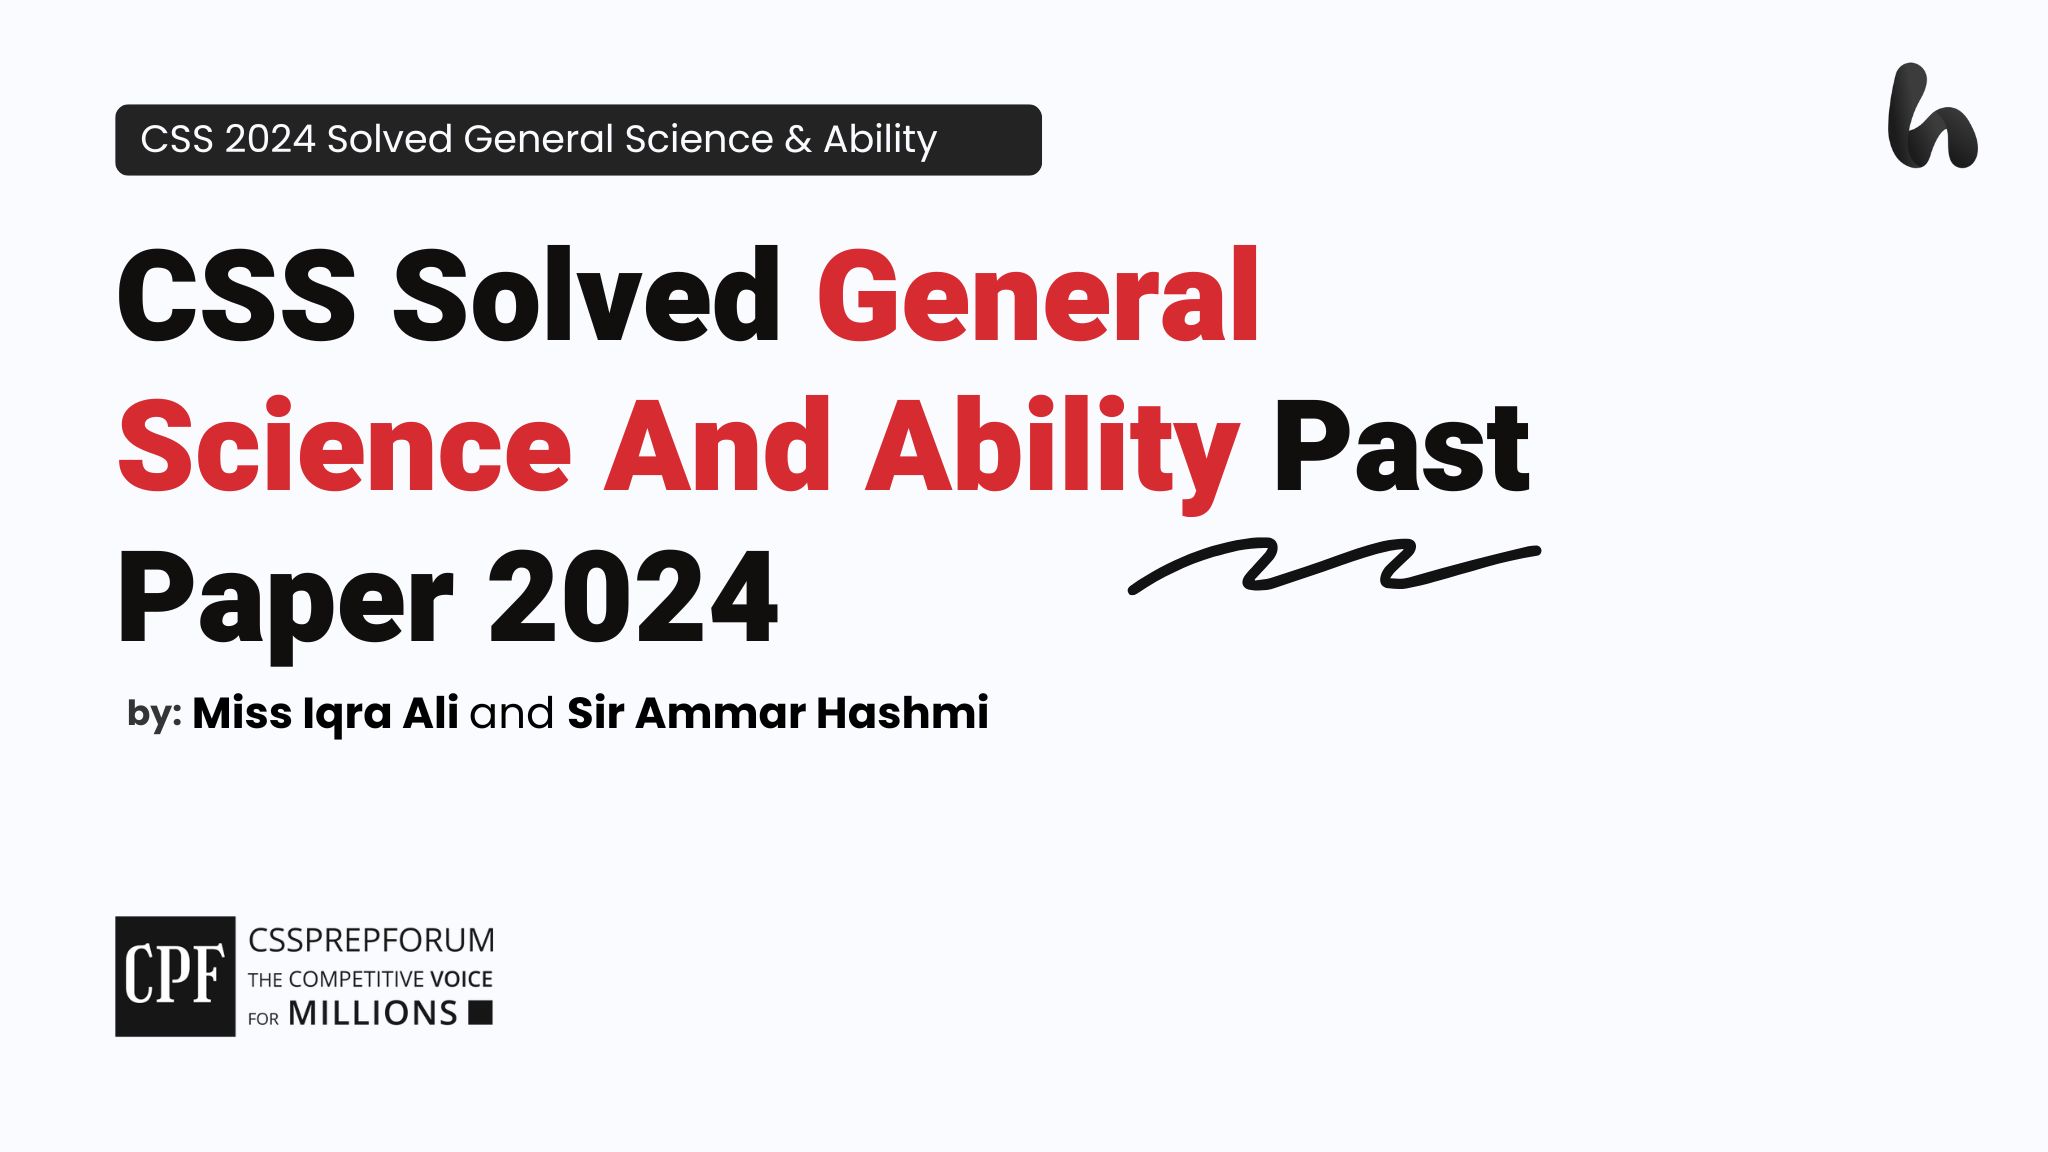 CSS Solved General Science And Ability Past Paper 2024 by Miss Iqra Ali and Sir Ammar Hashmi